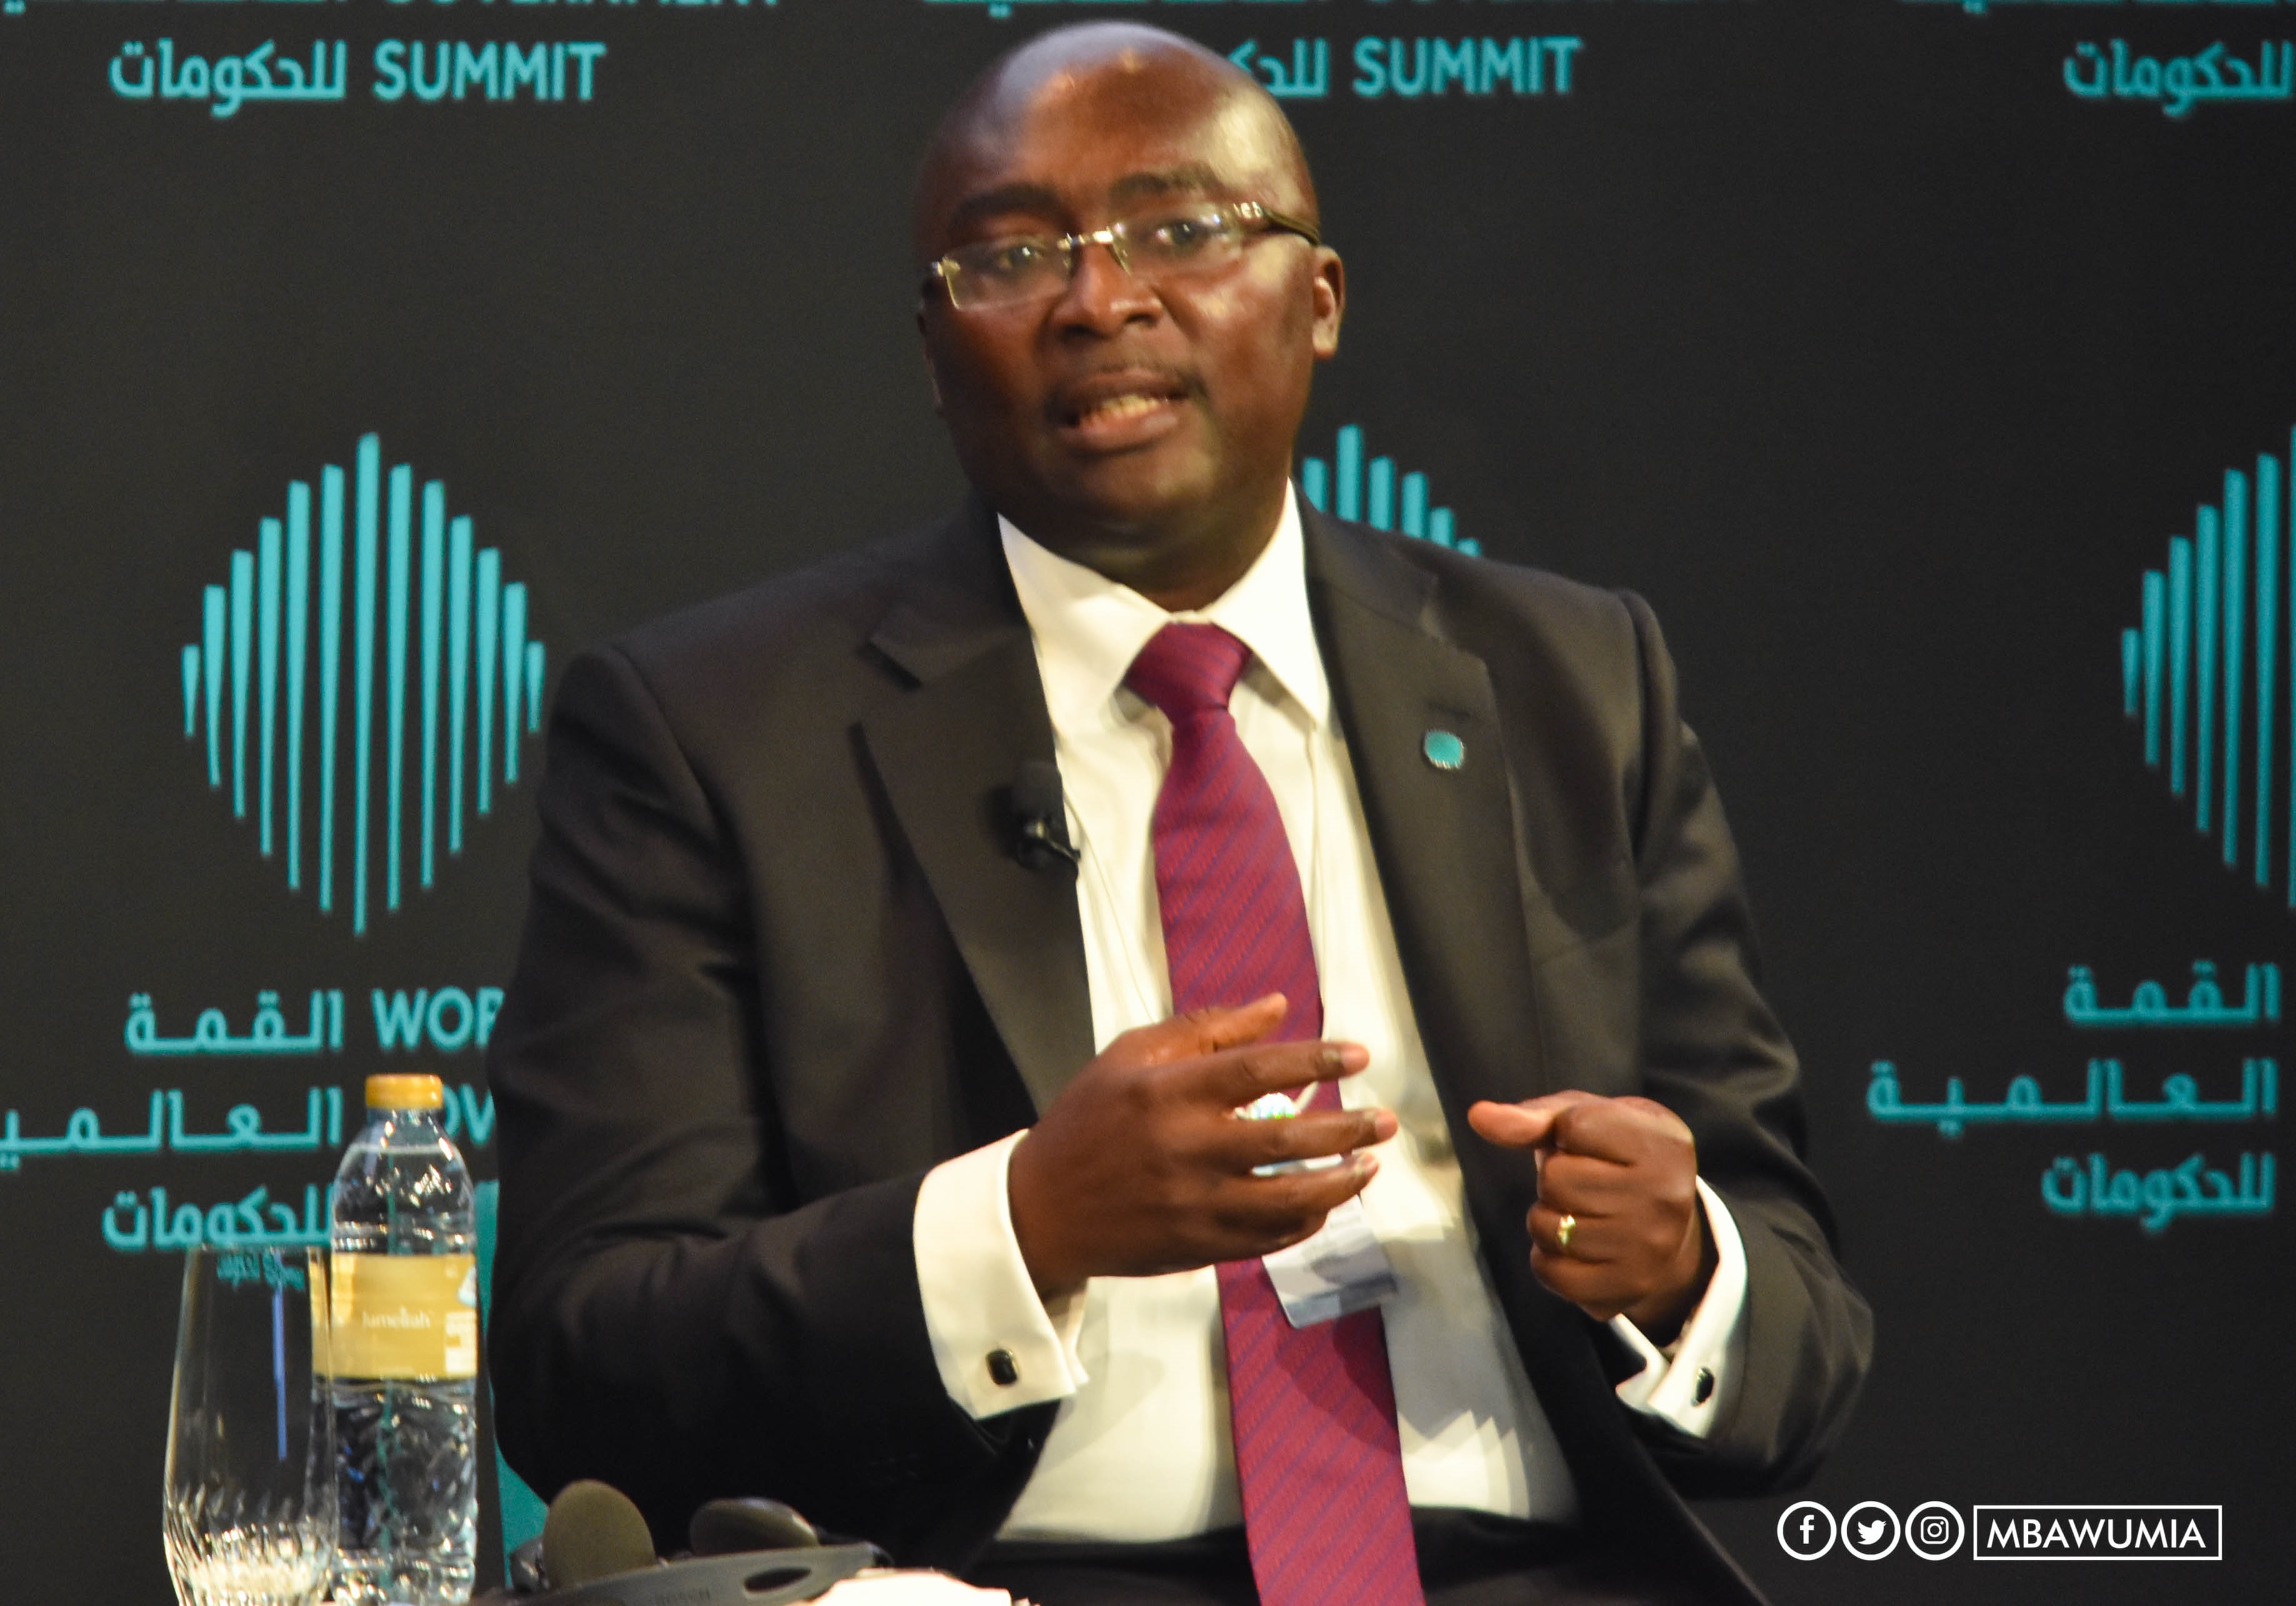 Use technology to improve lives – Bawumia urges African leaders